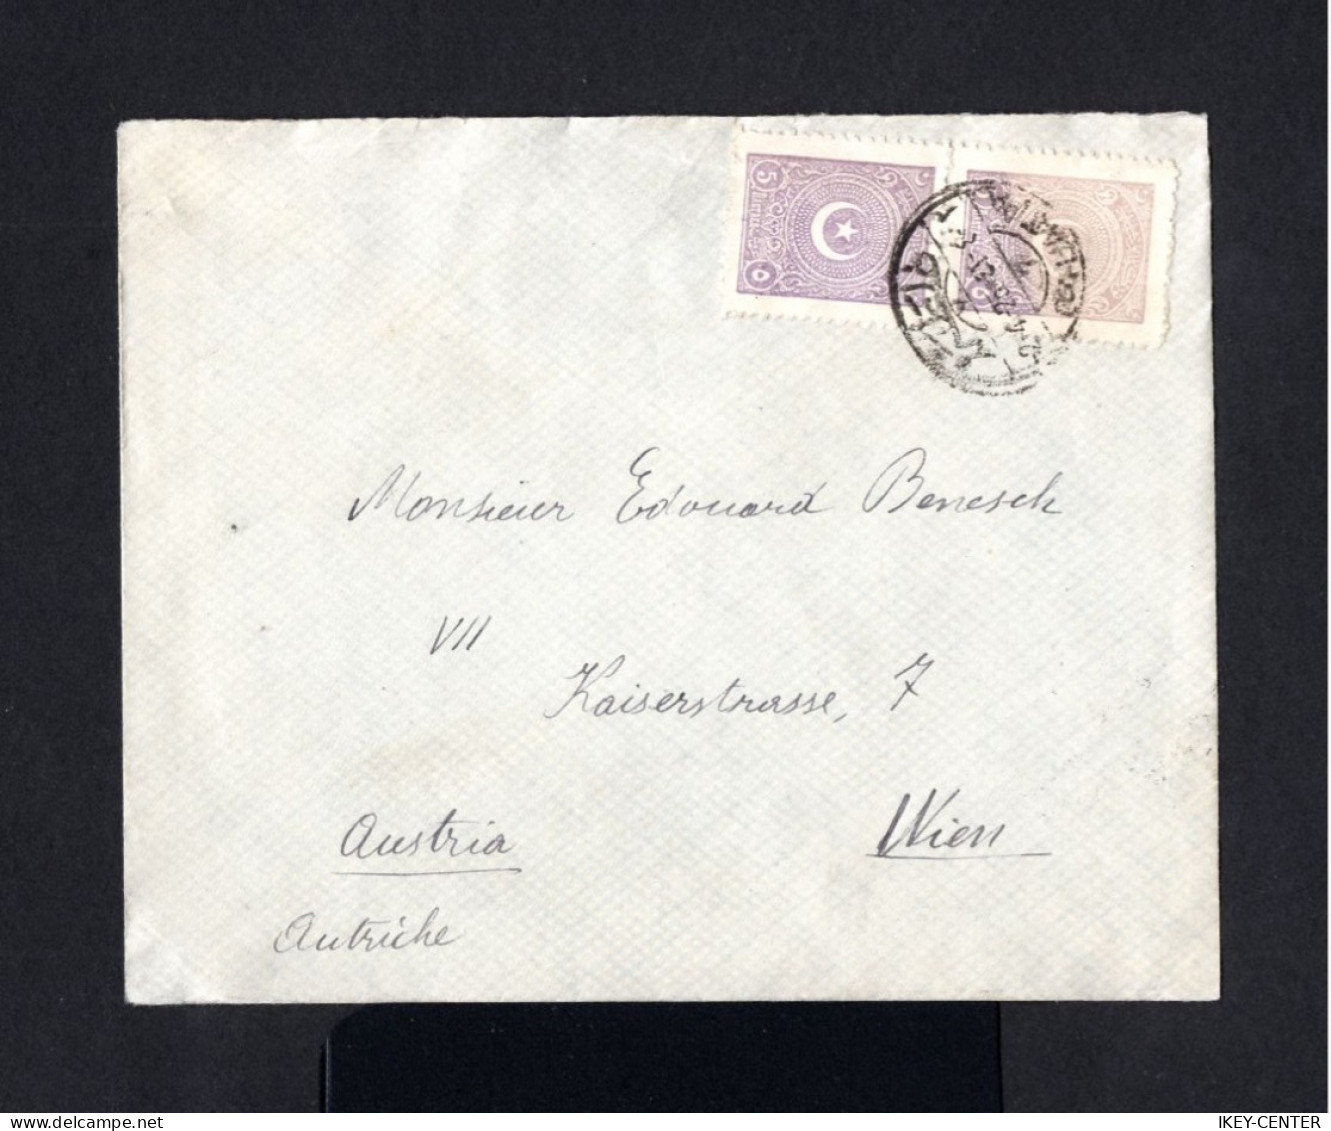 16352-TURKEY-OLD OTTOMAN COVER GALATA To VIENNA (austria) 1925.ENVELOPPE.Brief.TURQUIE - Covers & Documents